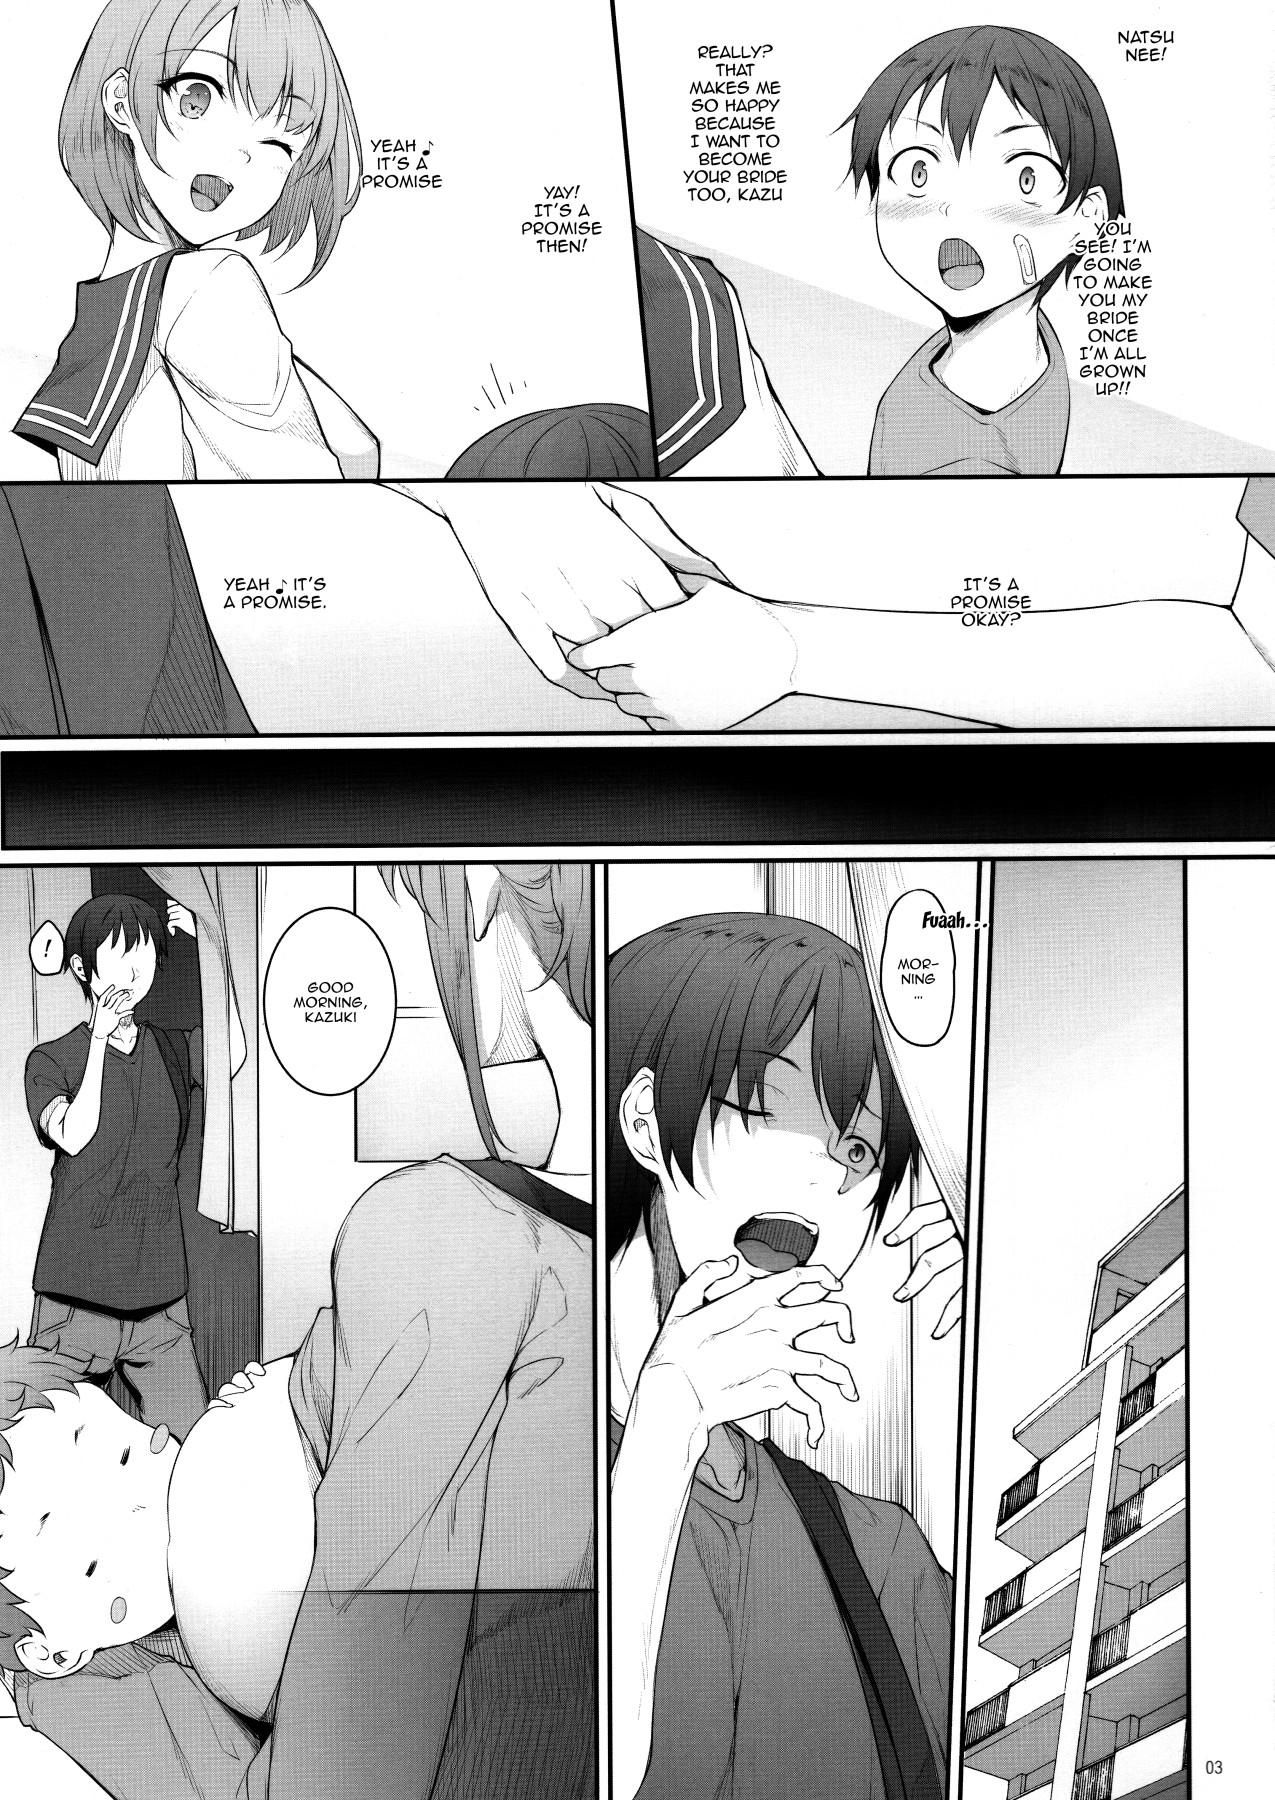 Hymen Ane o Netotta Hi | The Day I Did NTR With My Older Sister - Original Hidden Cam - Page 2